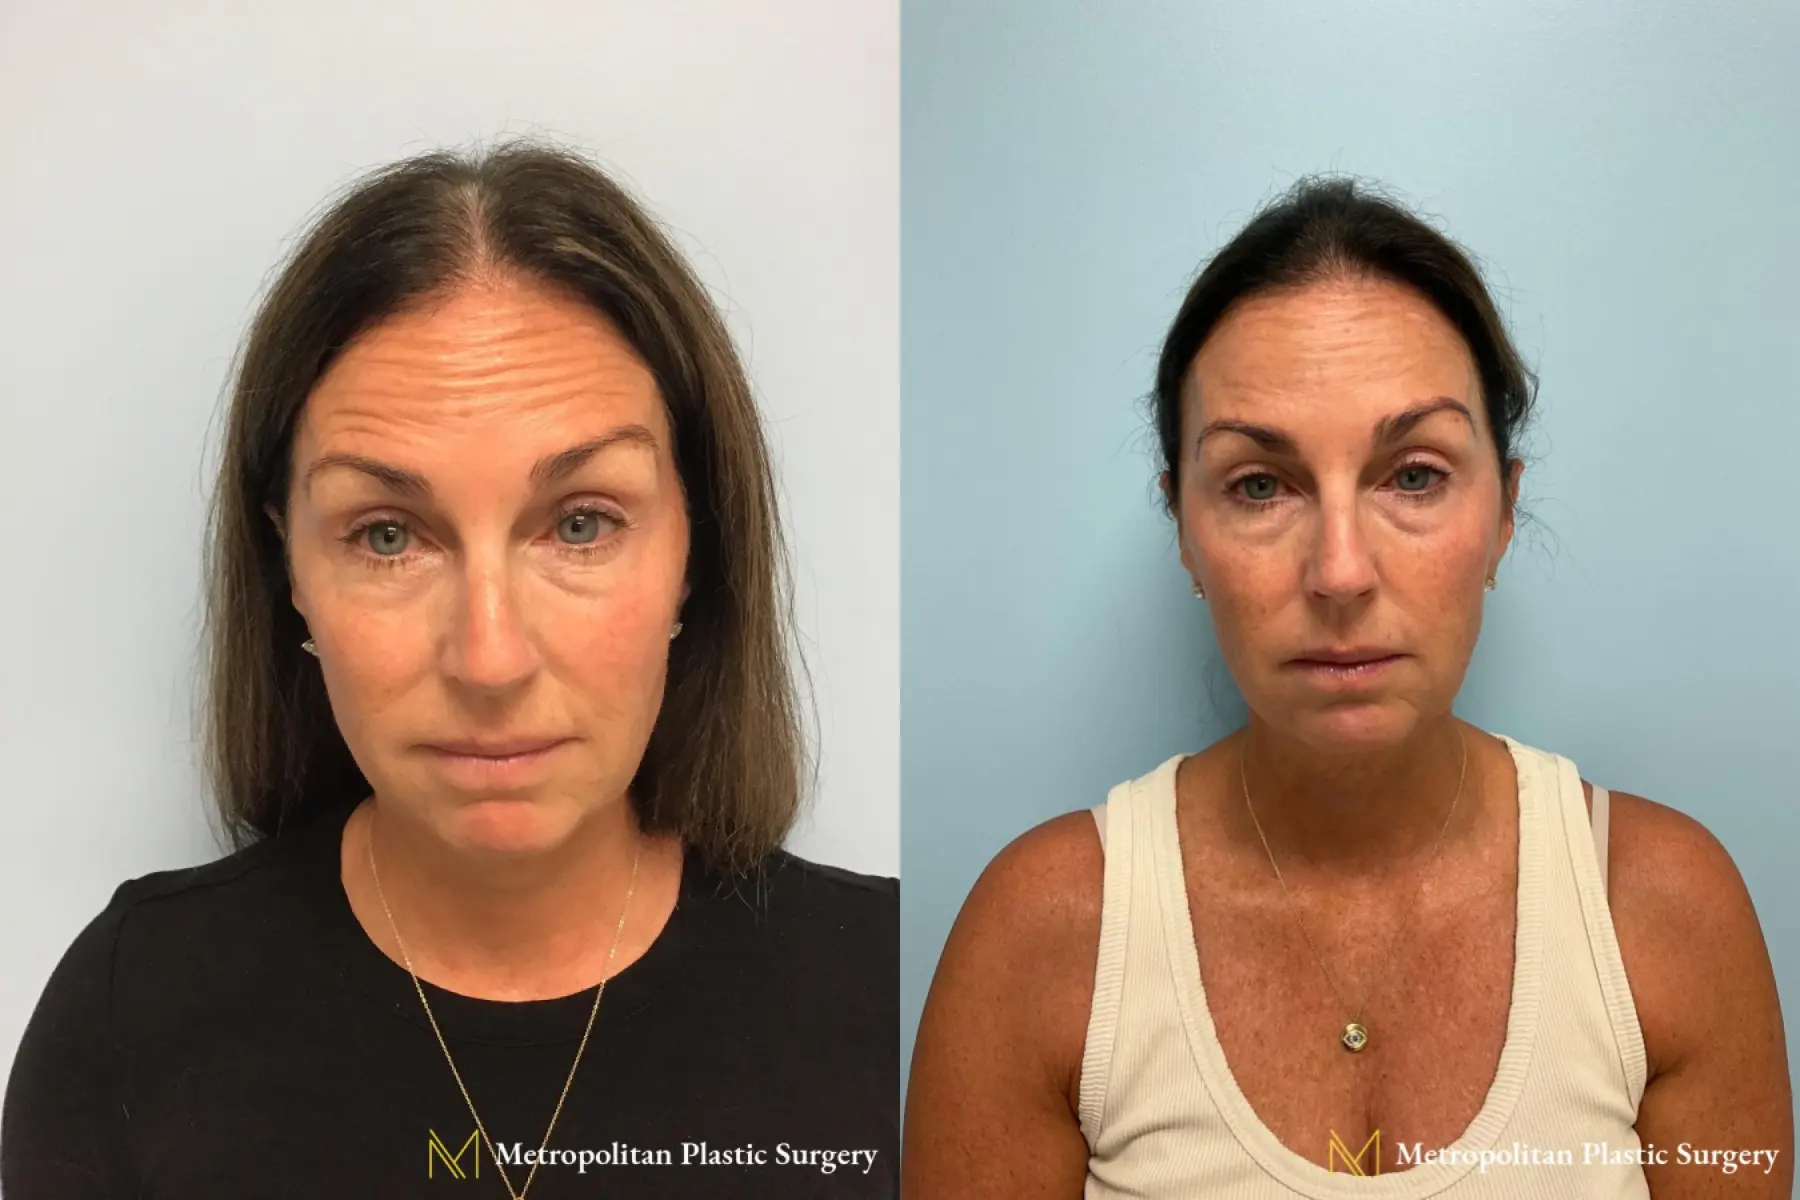 BOTOX® Cosmetic: Patient 3 - Before and After  